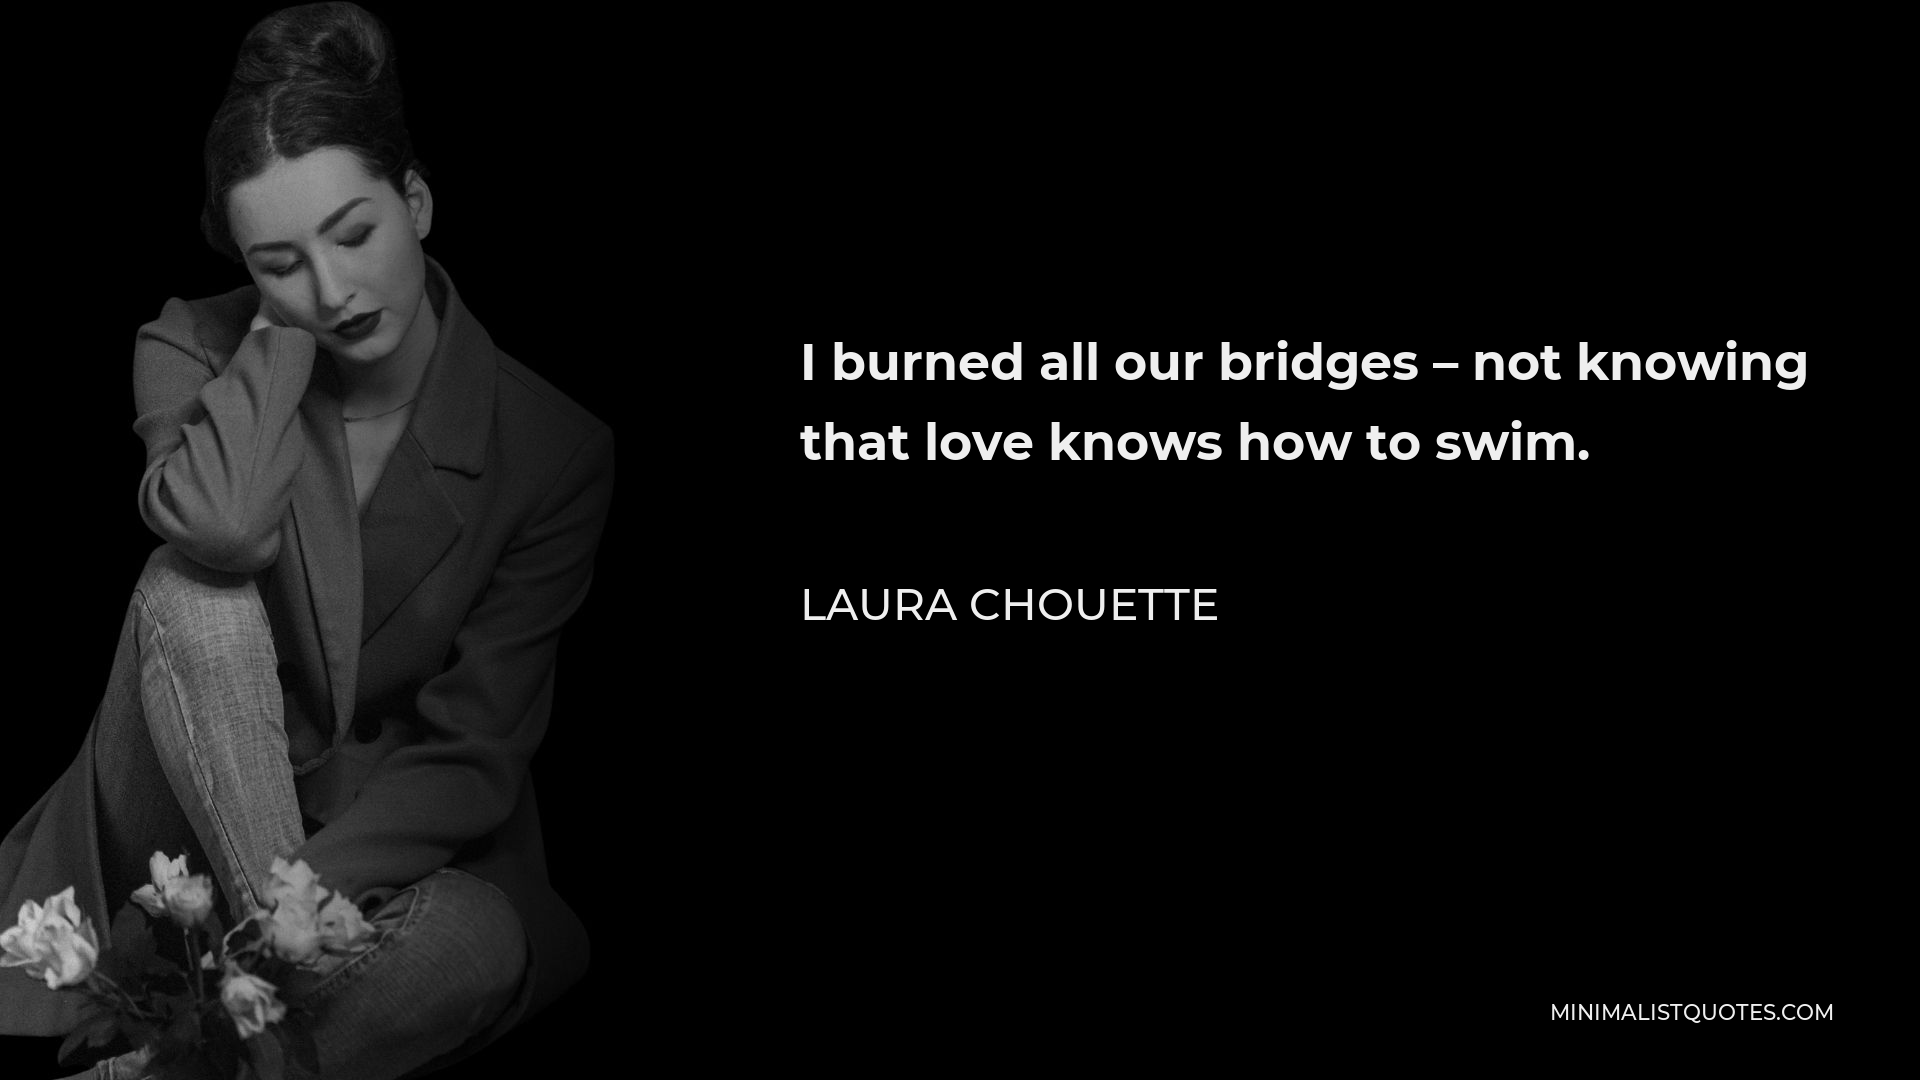 Laura Chouette Quote - I burned all our bridges – not knowing that love knows how to swim.